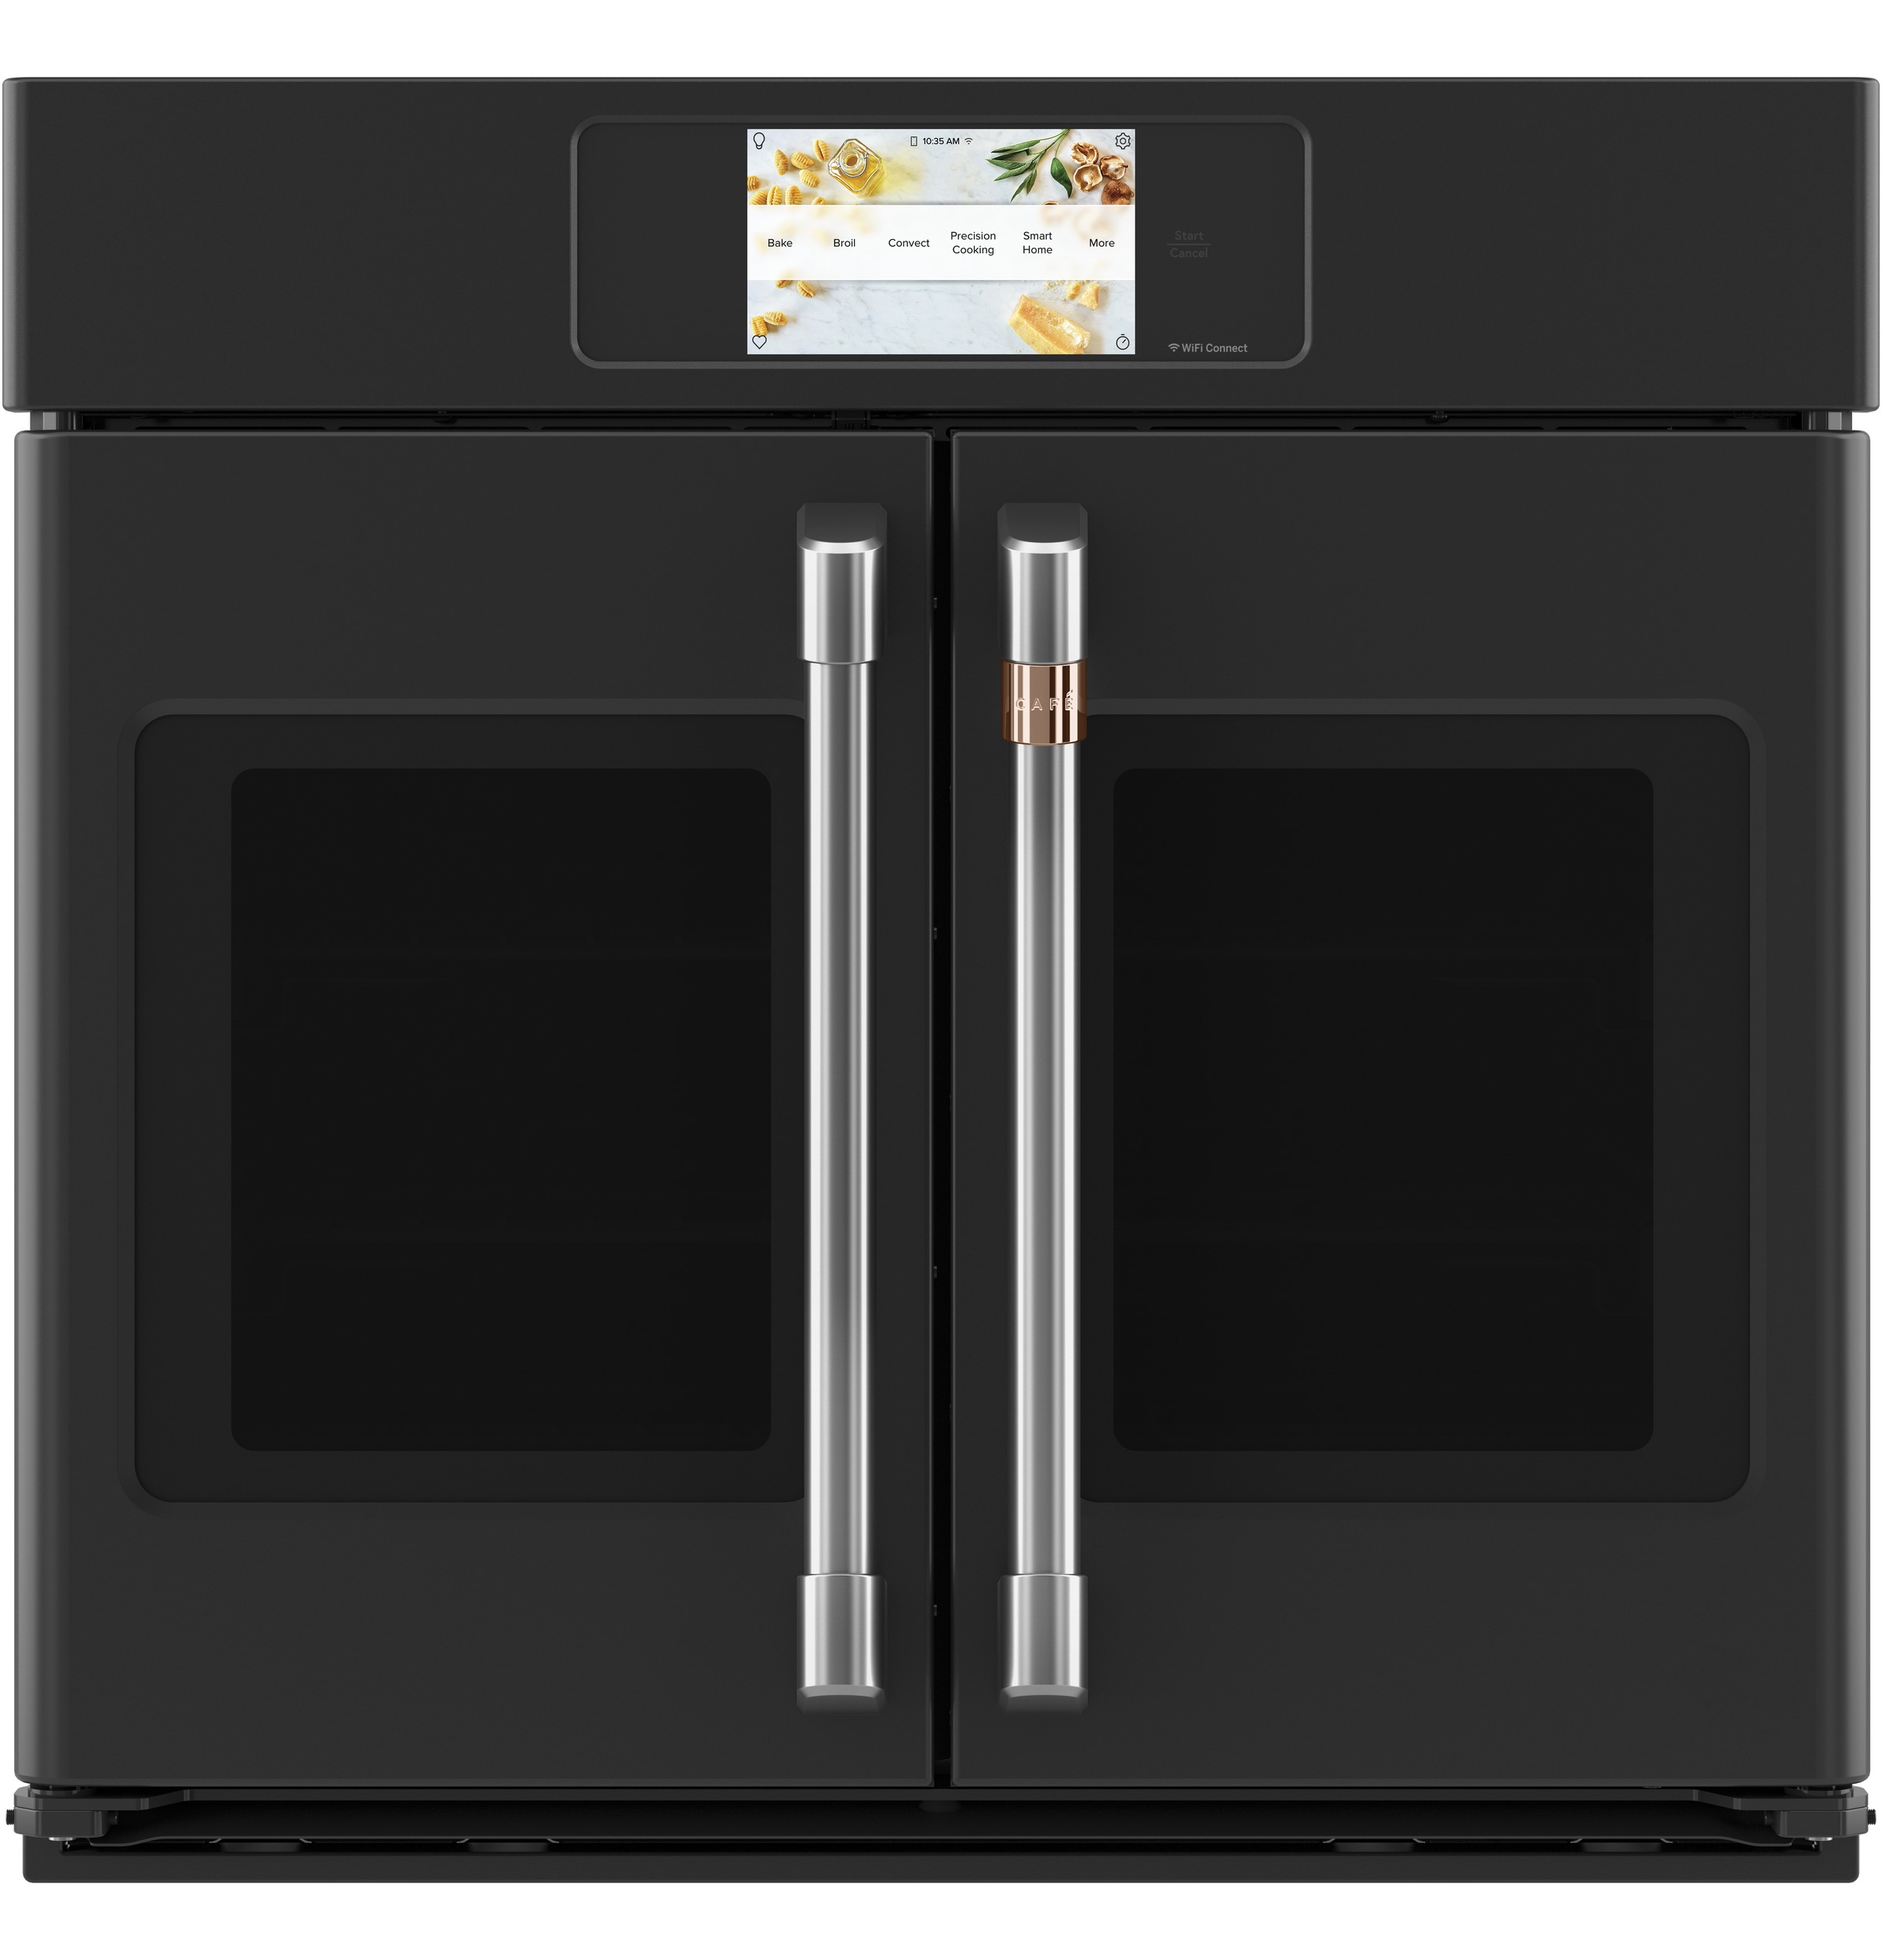 Model: CTS90FP3ND1 | Cafe Café™ Professional Series 30" Smart Built-In Convection French-Door Single Wall Oven